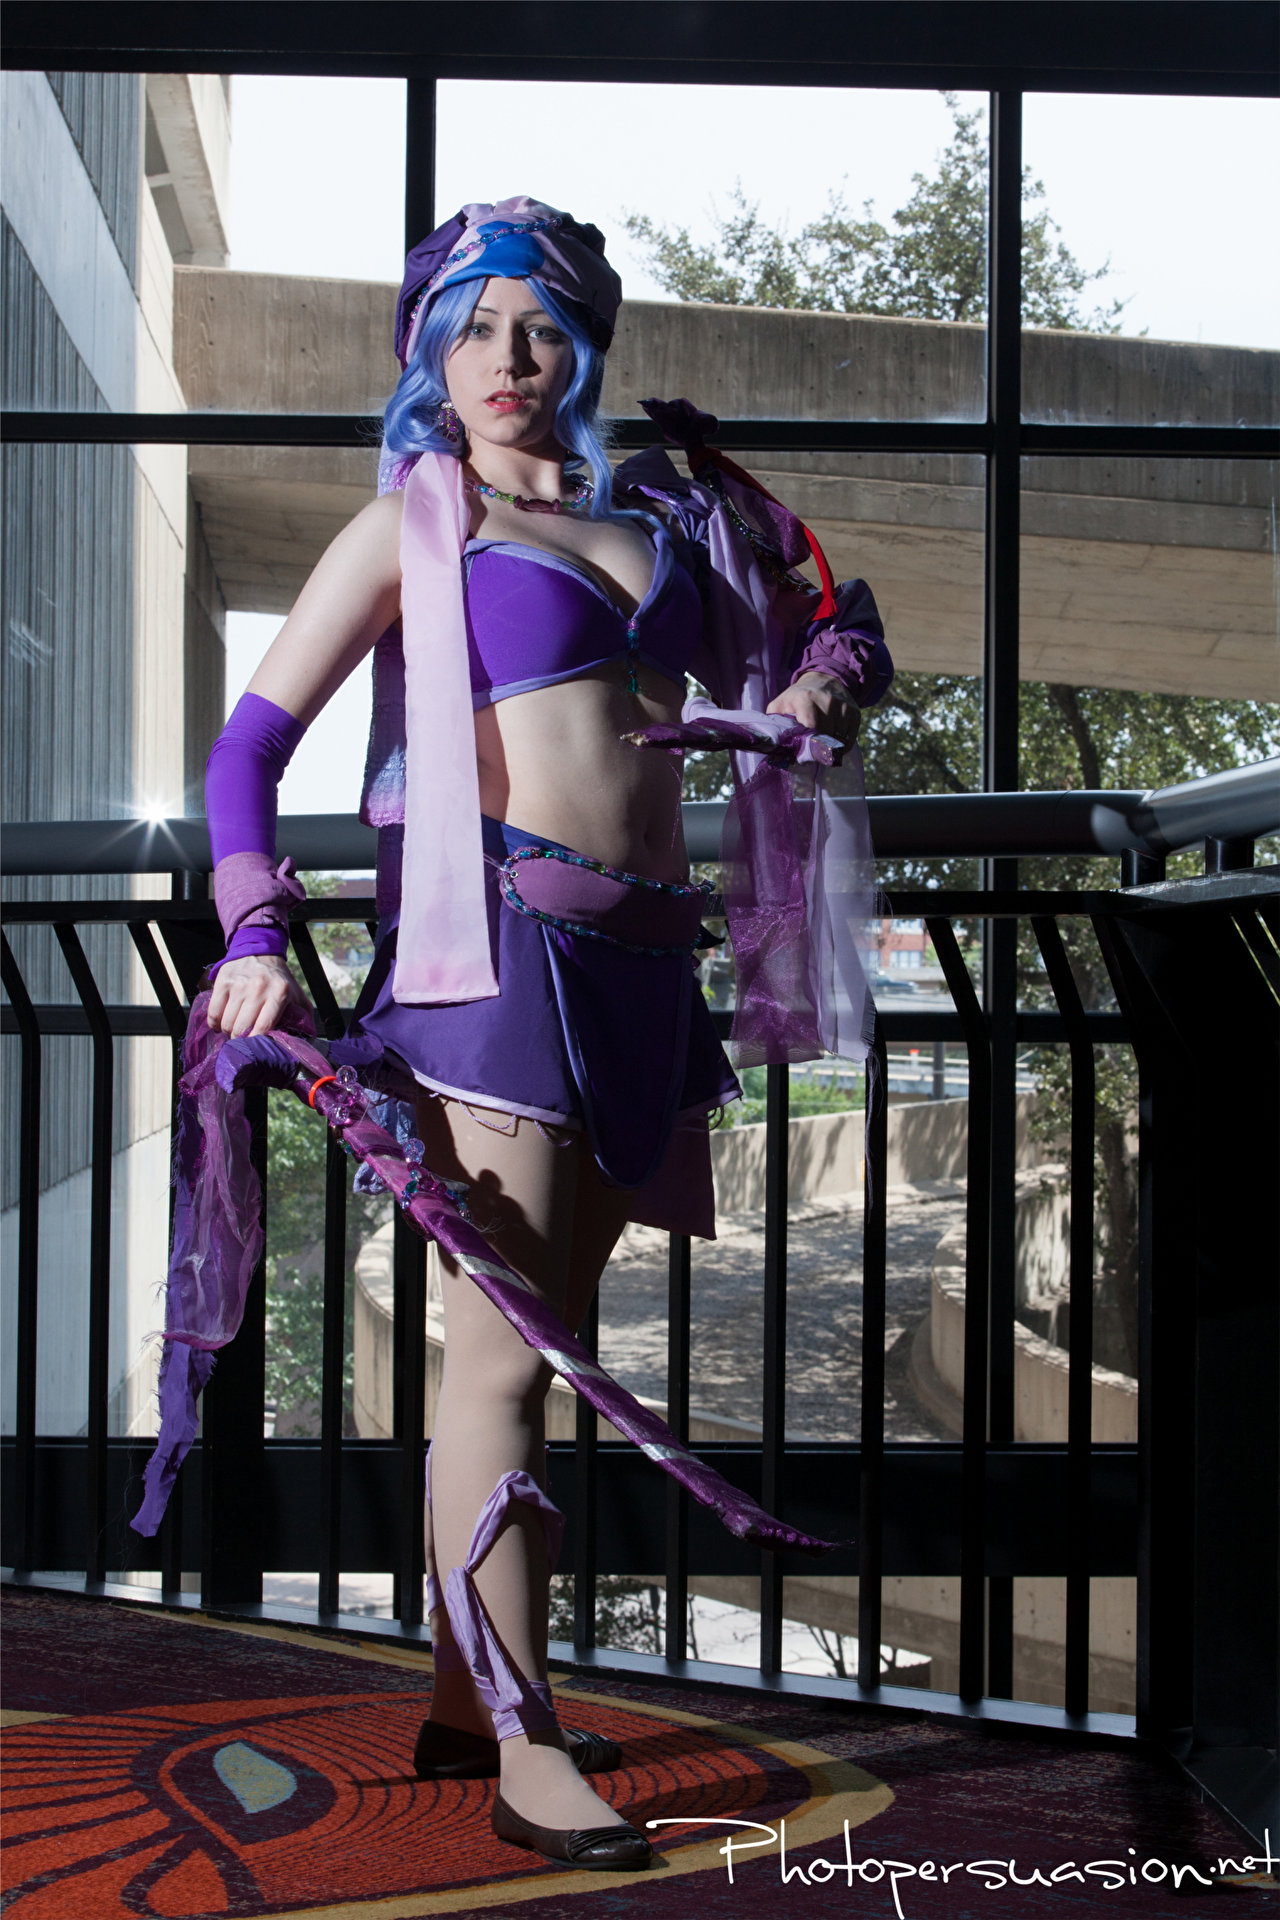 Cospix.net photo featuring TifaIA Cosplay